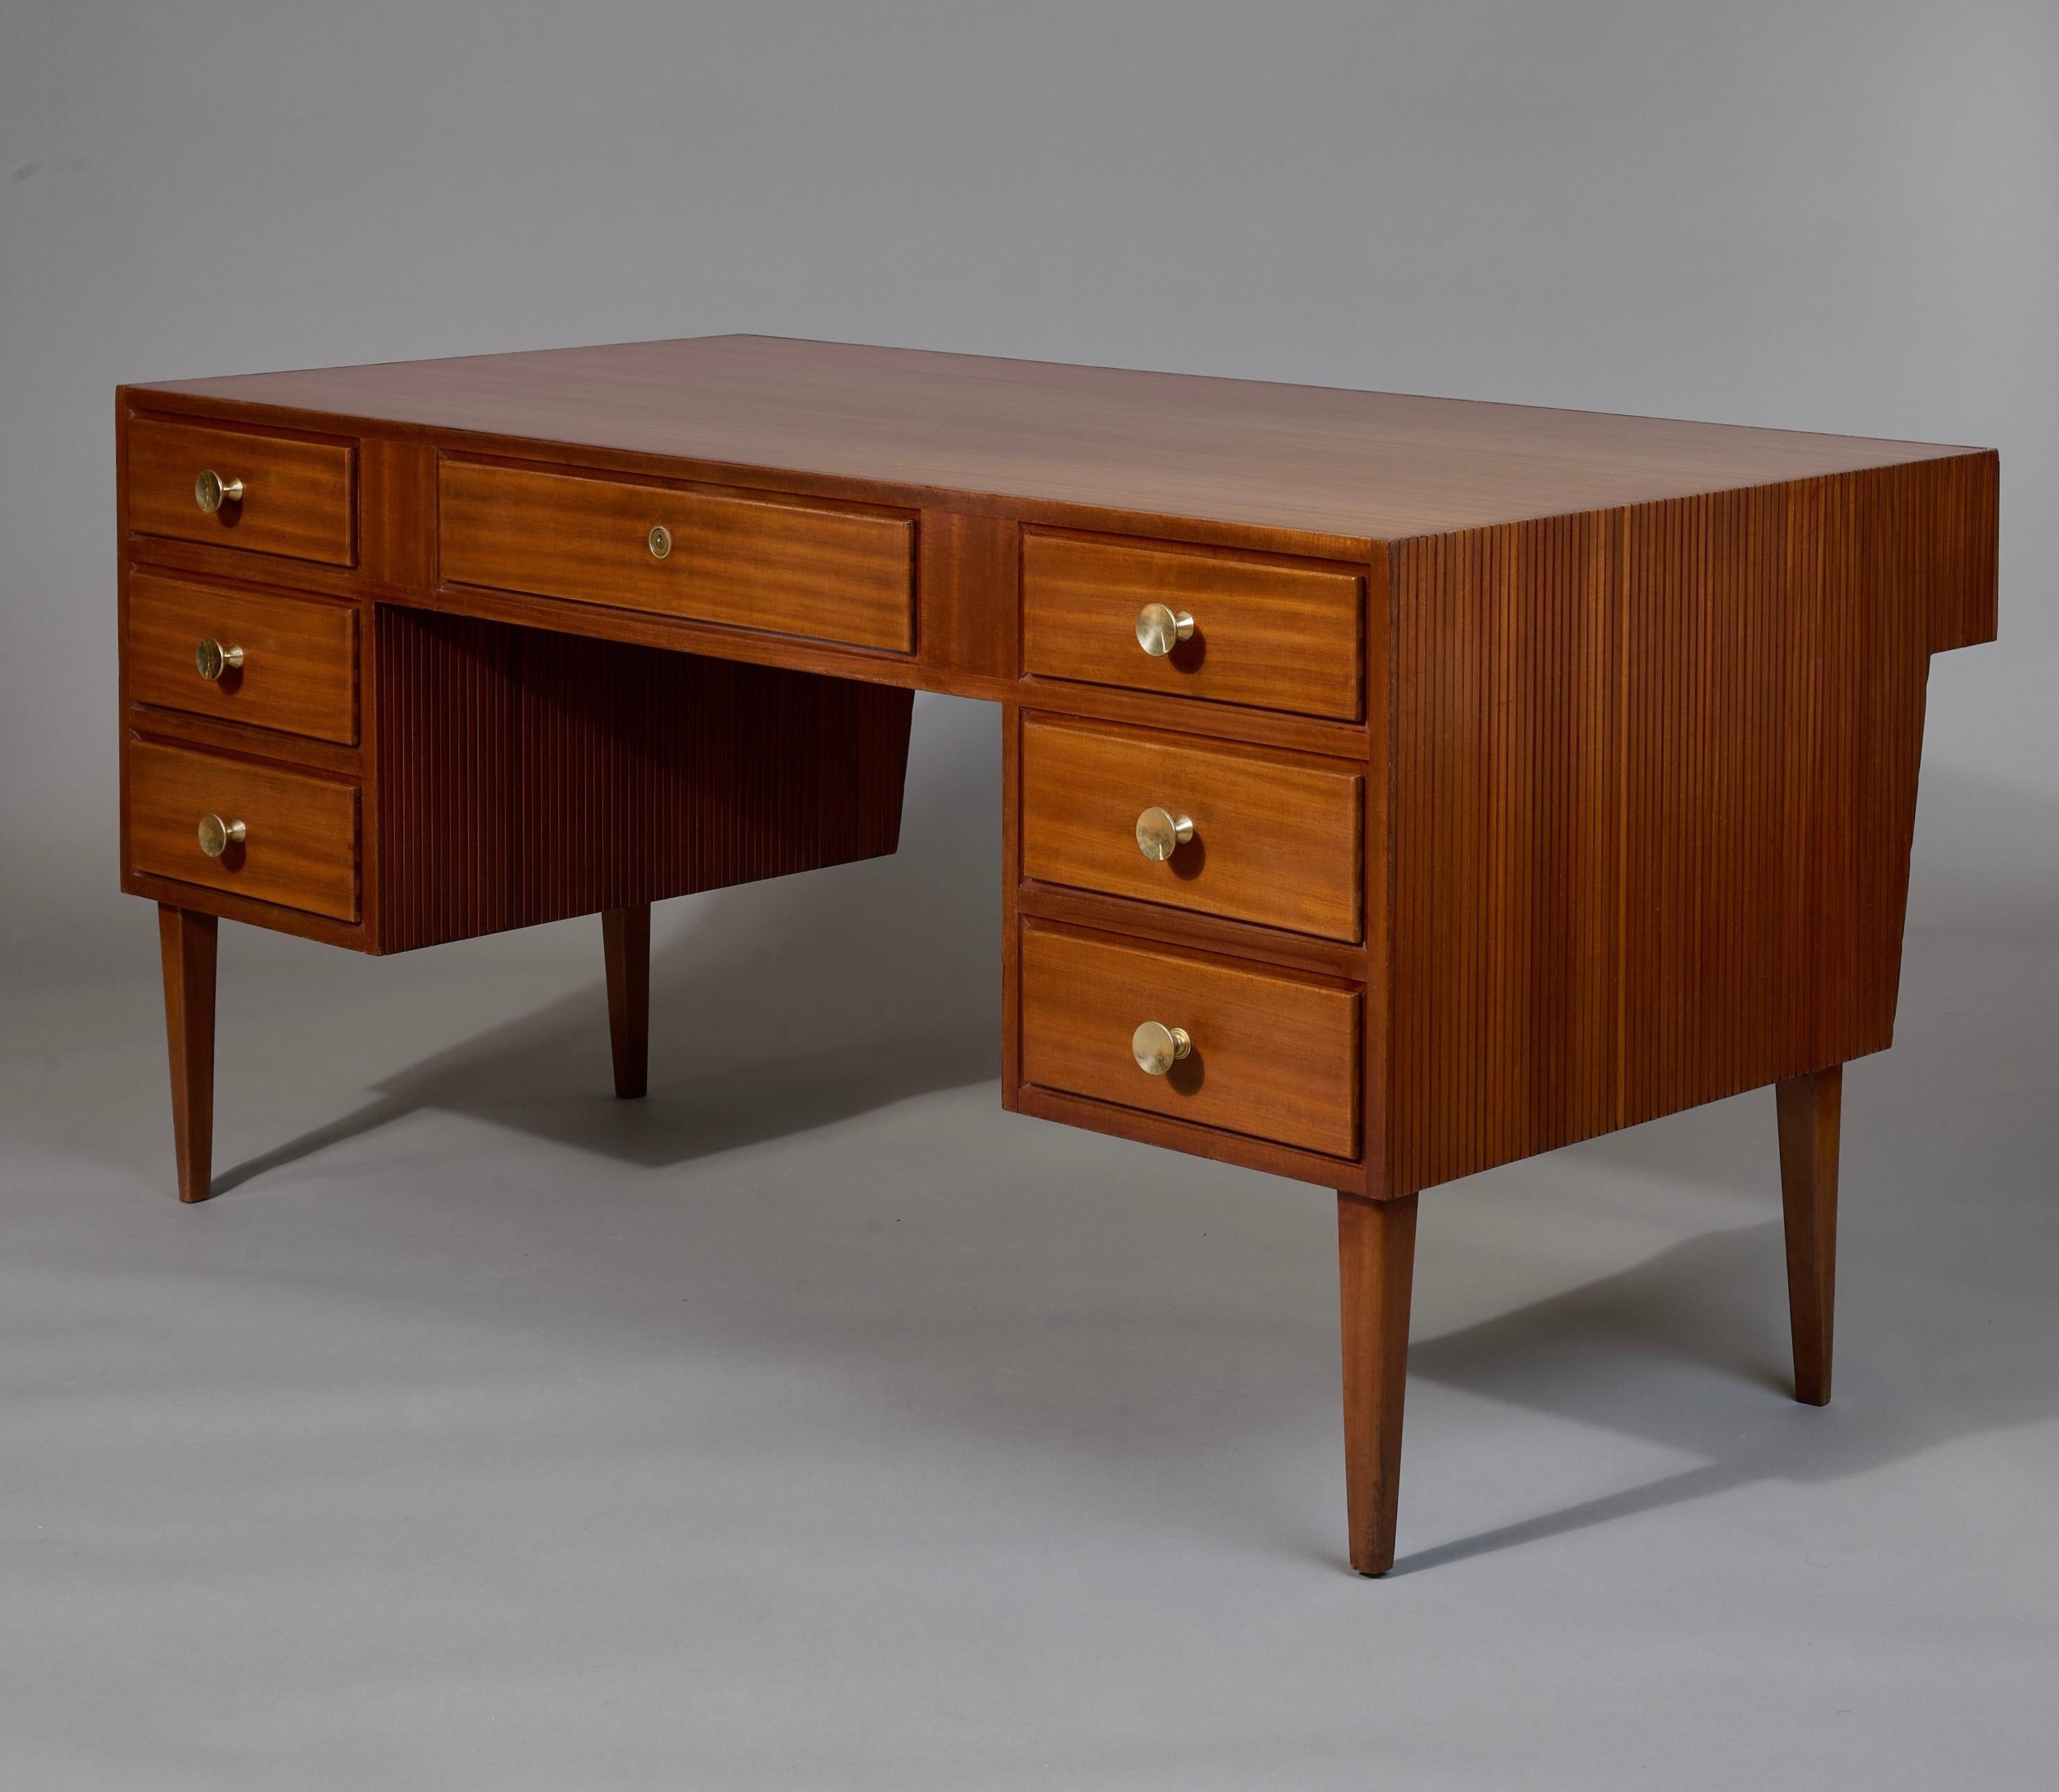 Gio Ponti (1891-1979)

A rare and important executive desk by Gio Ponti, in dramatically carved and reeded walnut with polished brass details. Impeccably crafted, starkly geometric in composition, and imposing in size, this significant work by